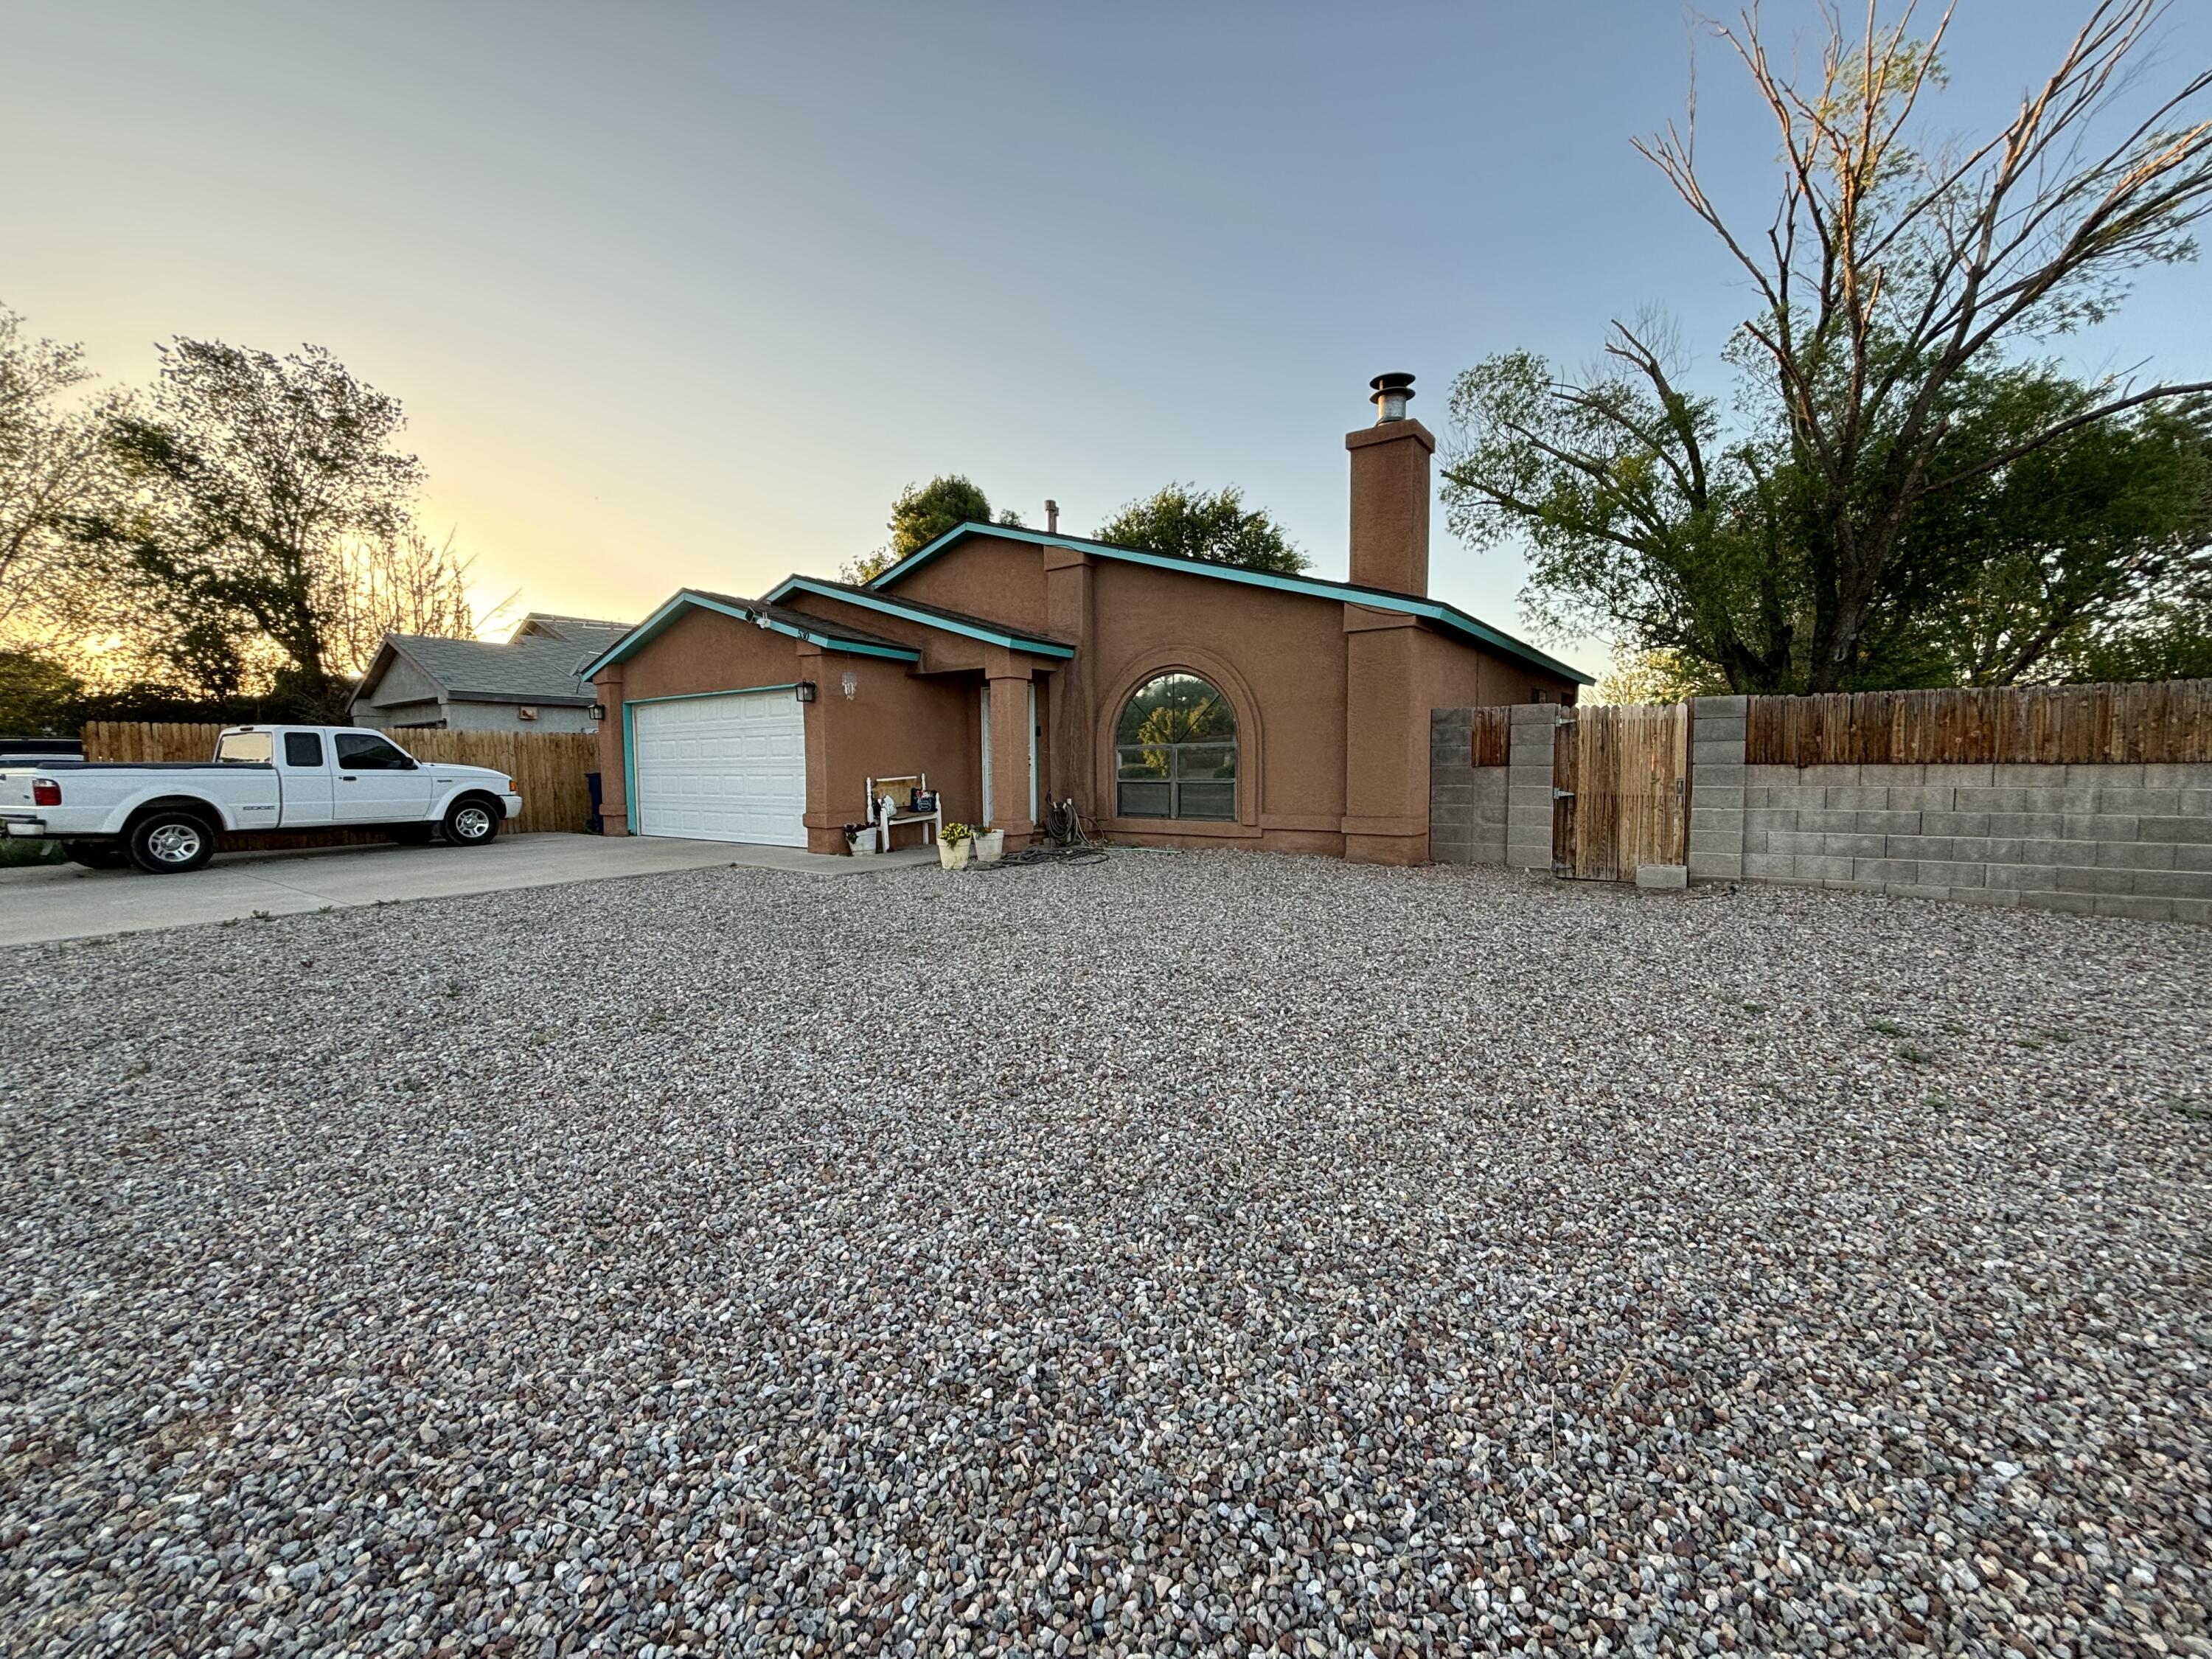 FANTABULOUS 3 bedroom, 2 bath house in the heart of Los Lunas.  Spacious living room with cathedral ceiling, plant ledge and fireplace.  Step-saver kitchen with all appliances.  Dining area has access to covered porch.  Private backyard with large shade tree.  Attached 2-car garage.